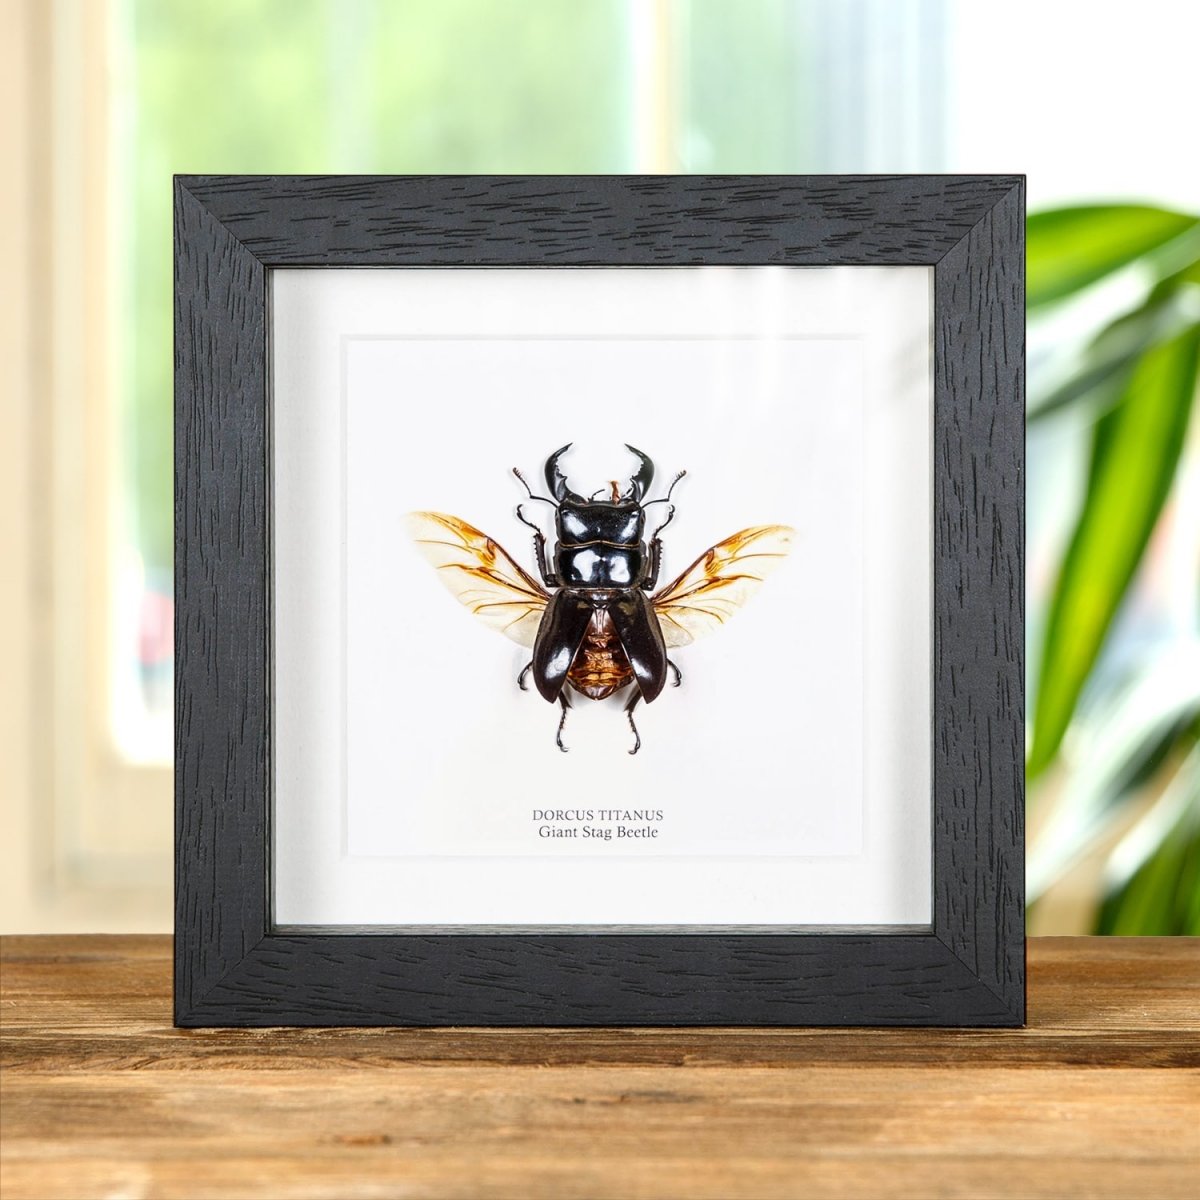 Minibeast Wing-spread Giant Stag Beetle in Box Frame (Dorcus titanus)